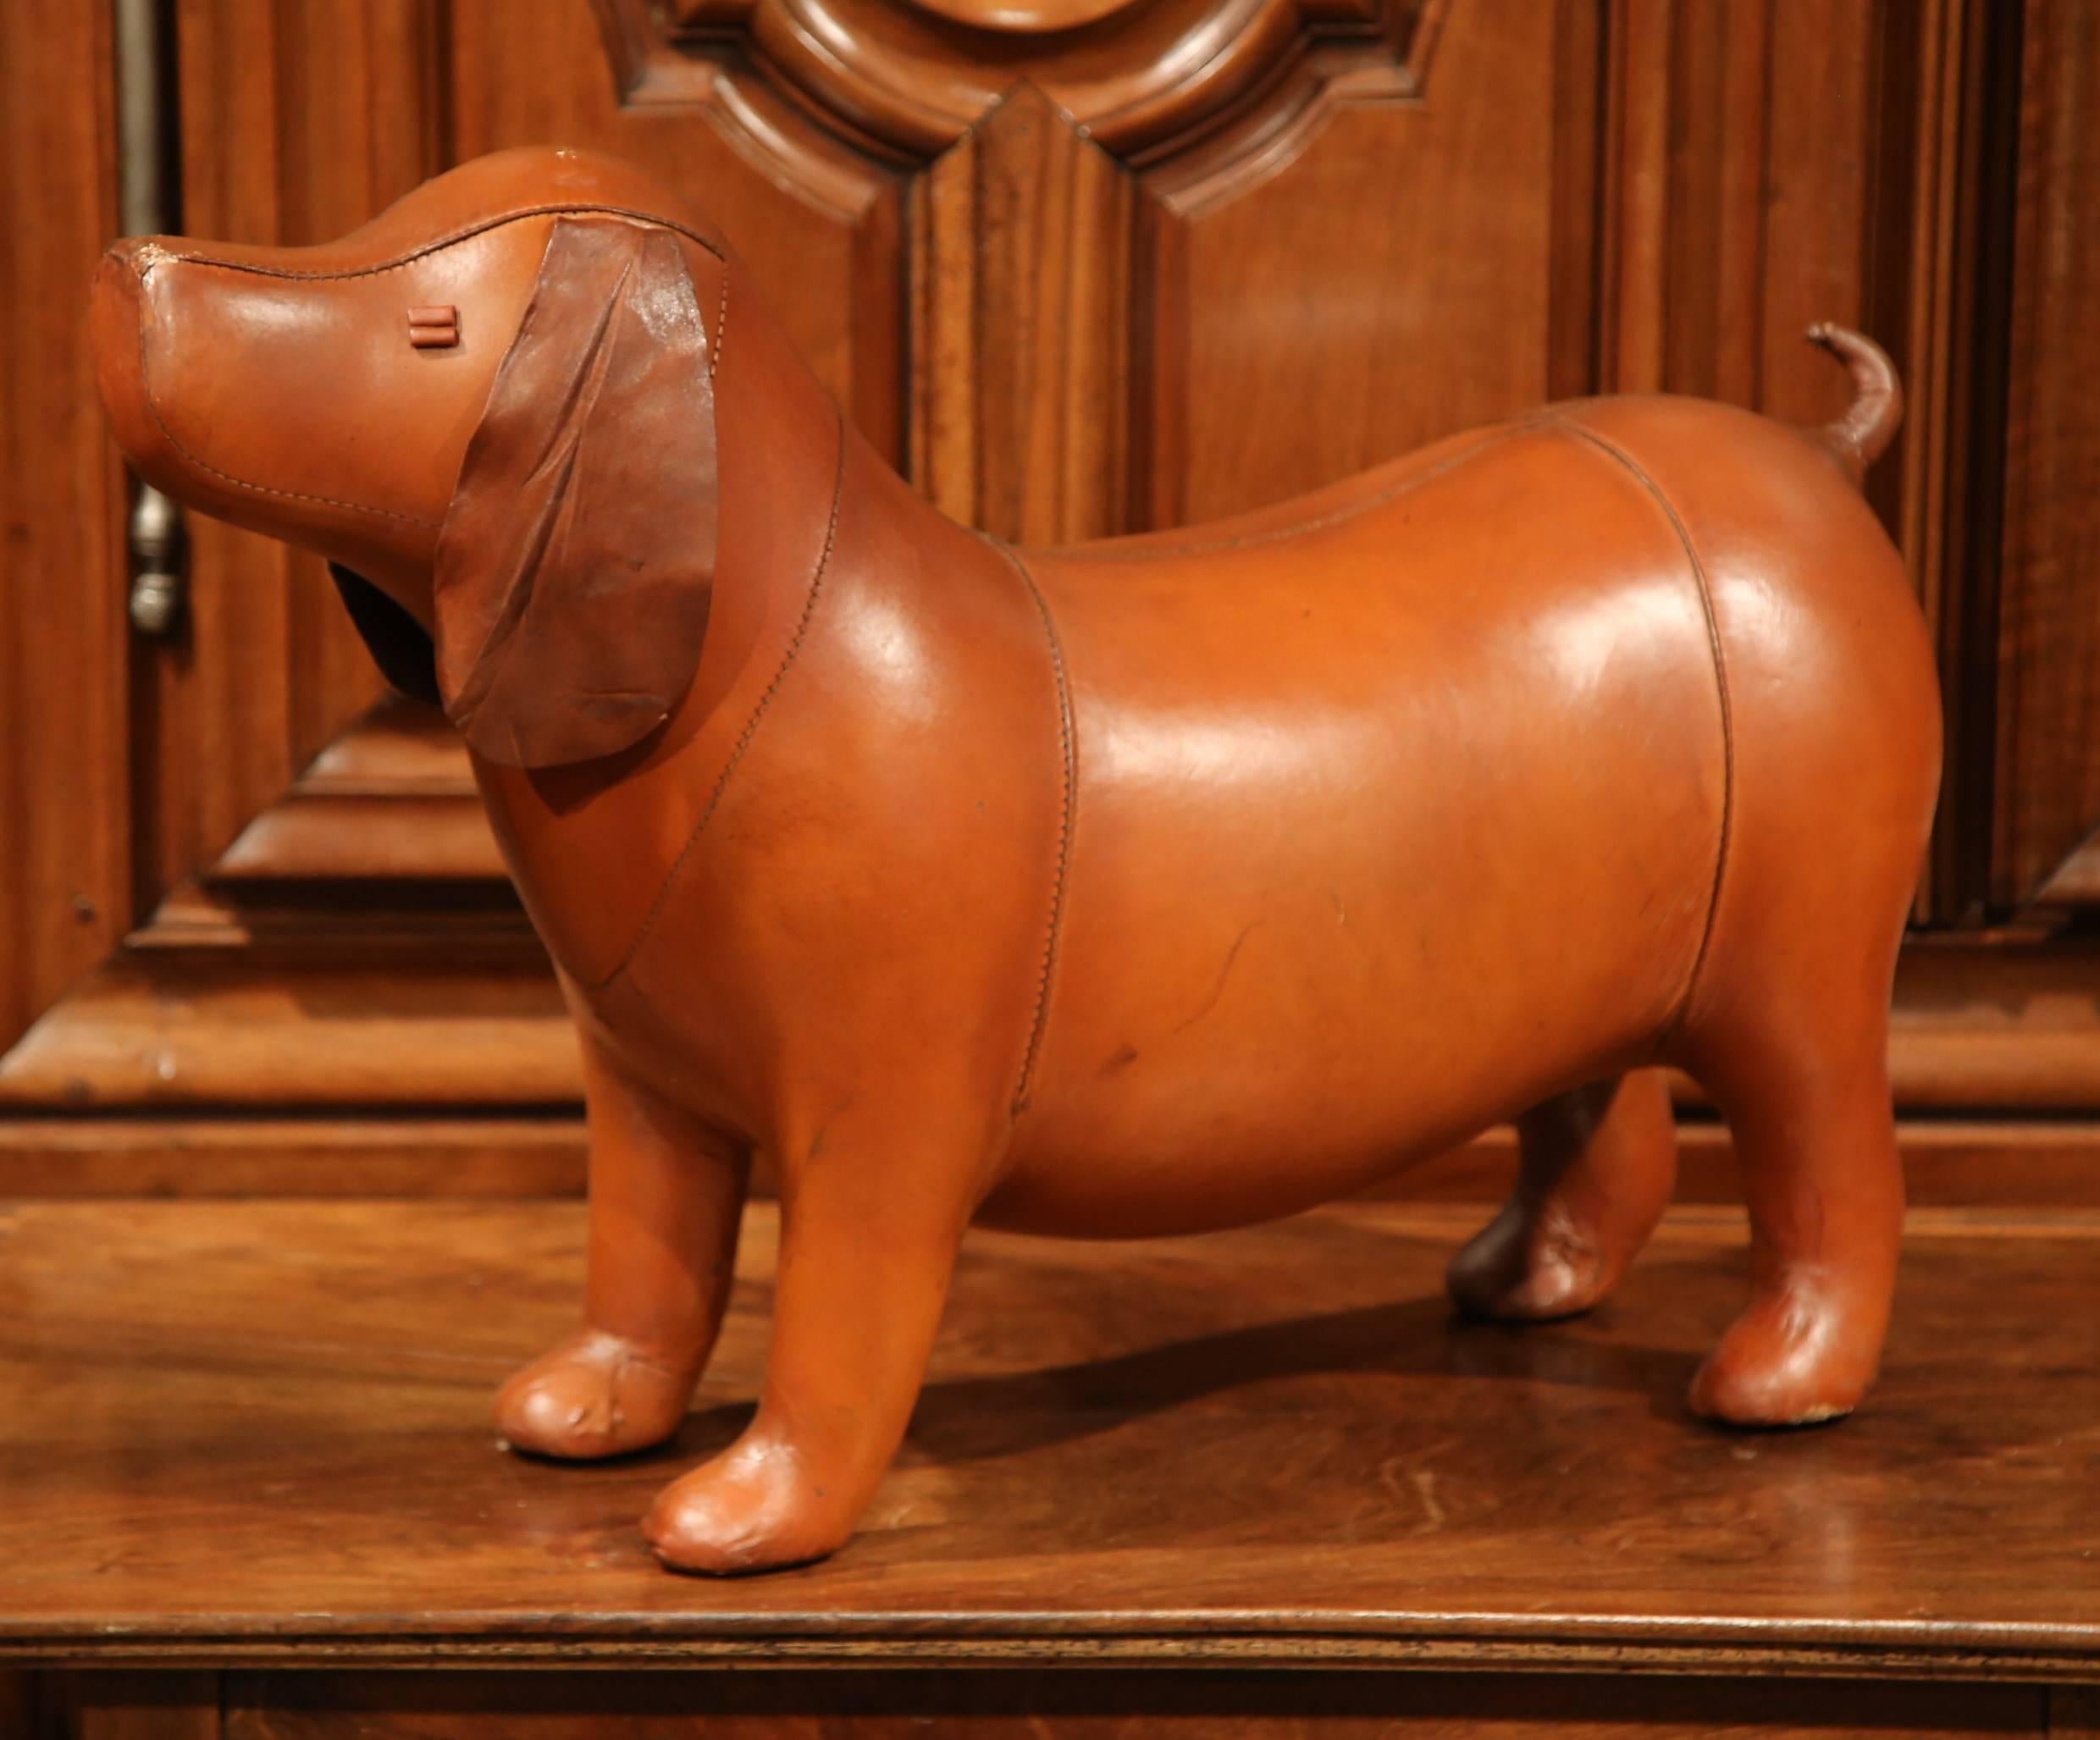 This unique leather footstool is full of character and will make a statement in your living room! Crafted in France, the footstool is in the shape of a dog and is covered in supple brown leather. The canine footrest has a curved back and is a